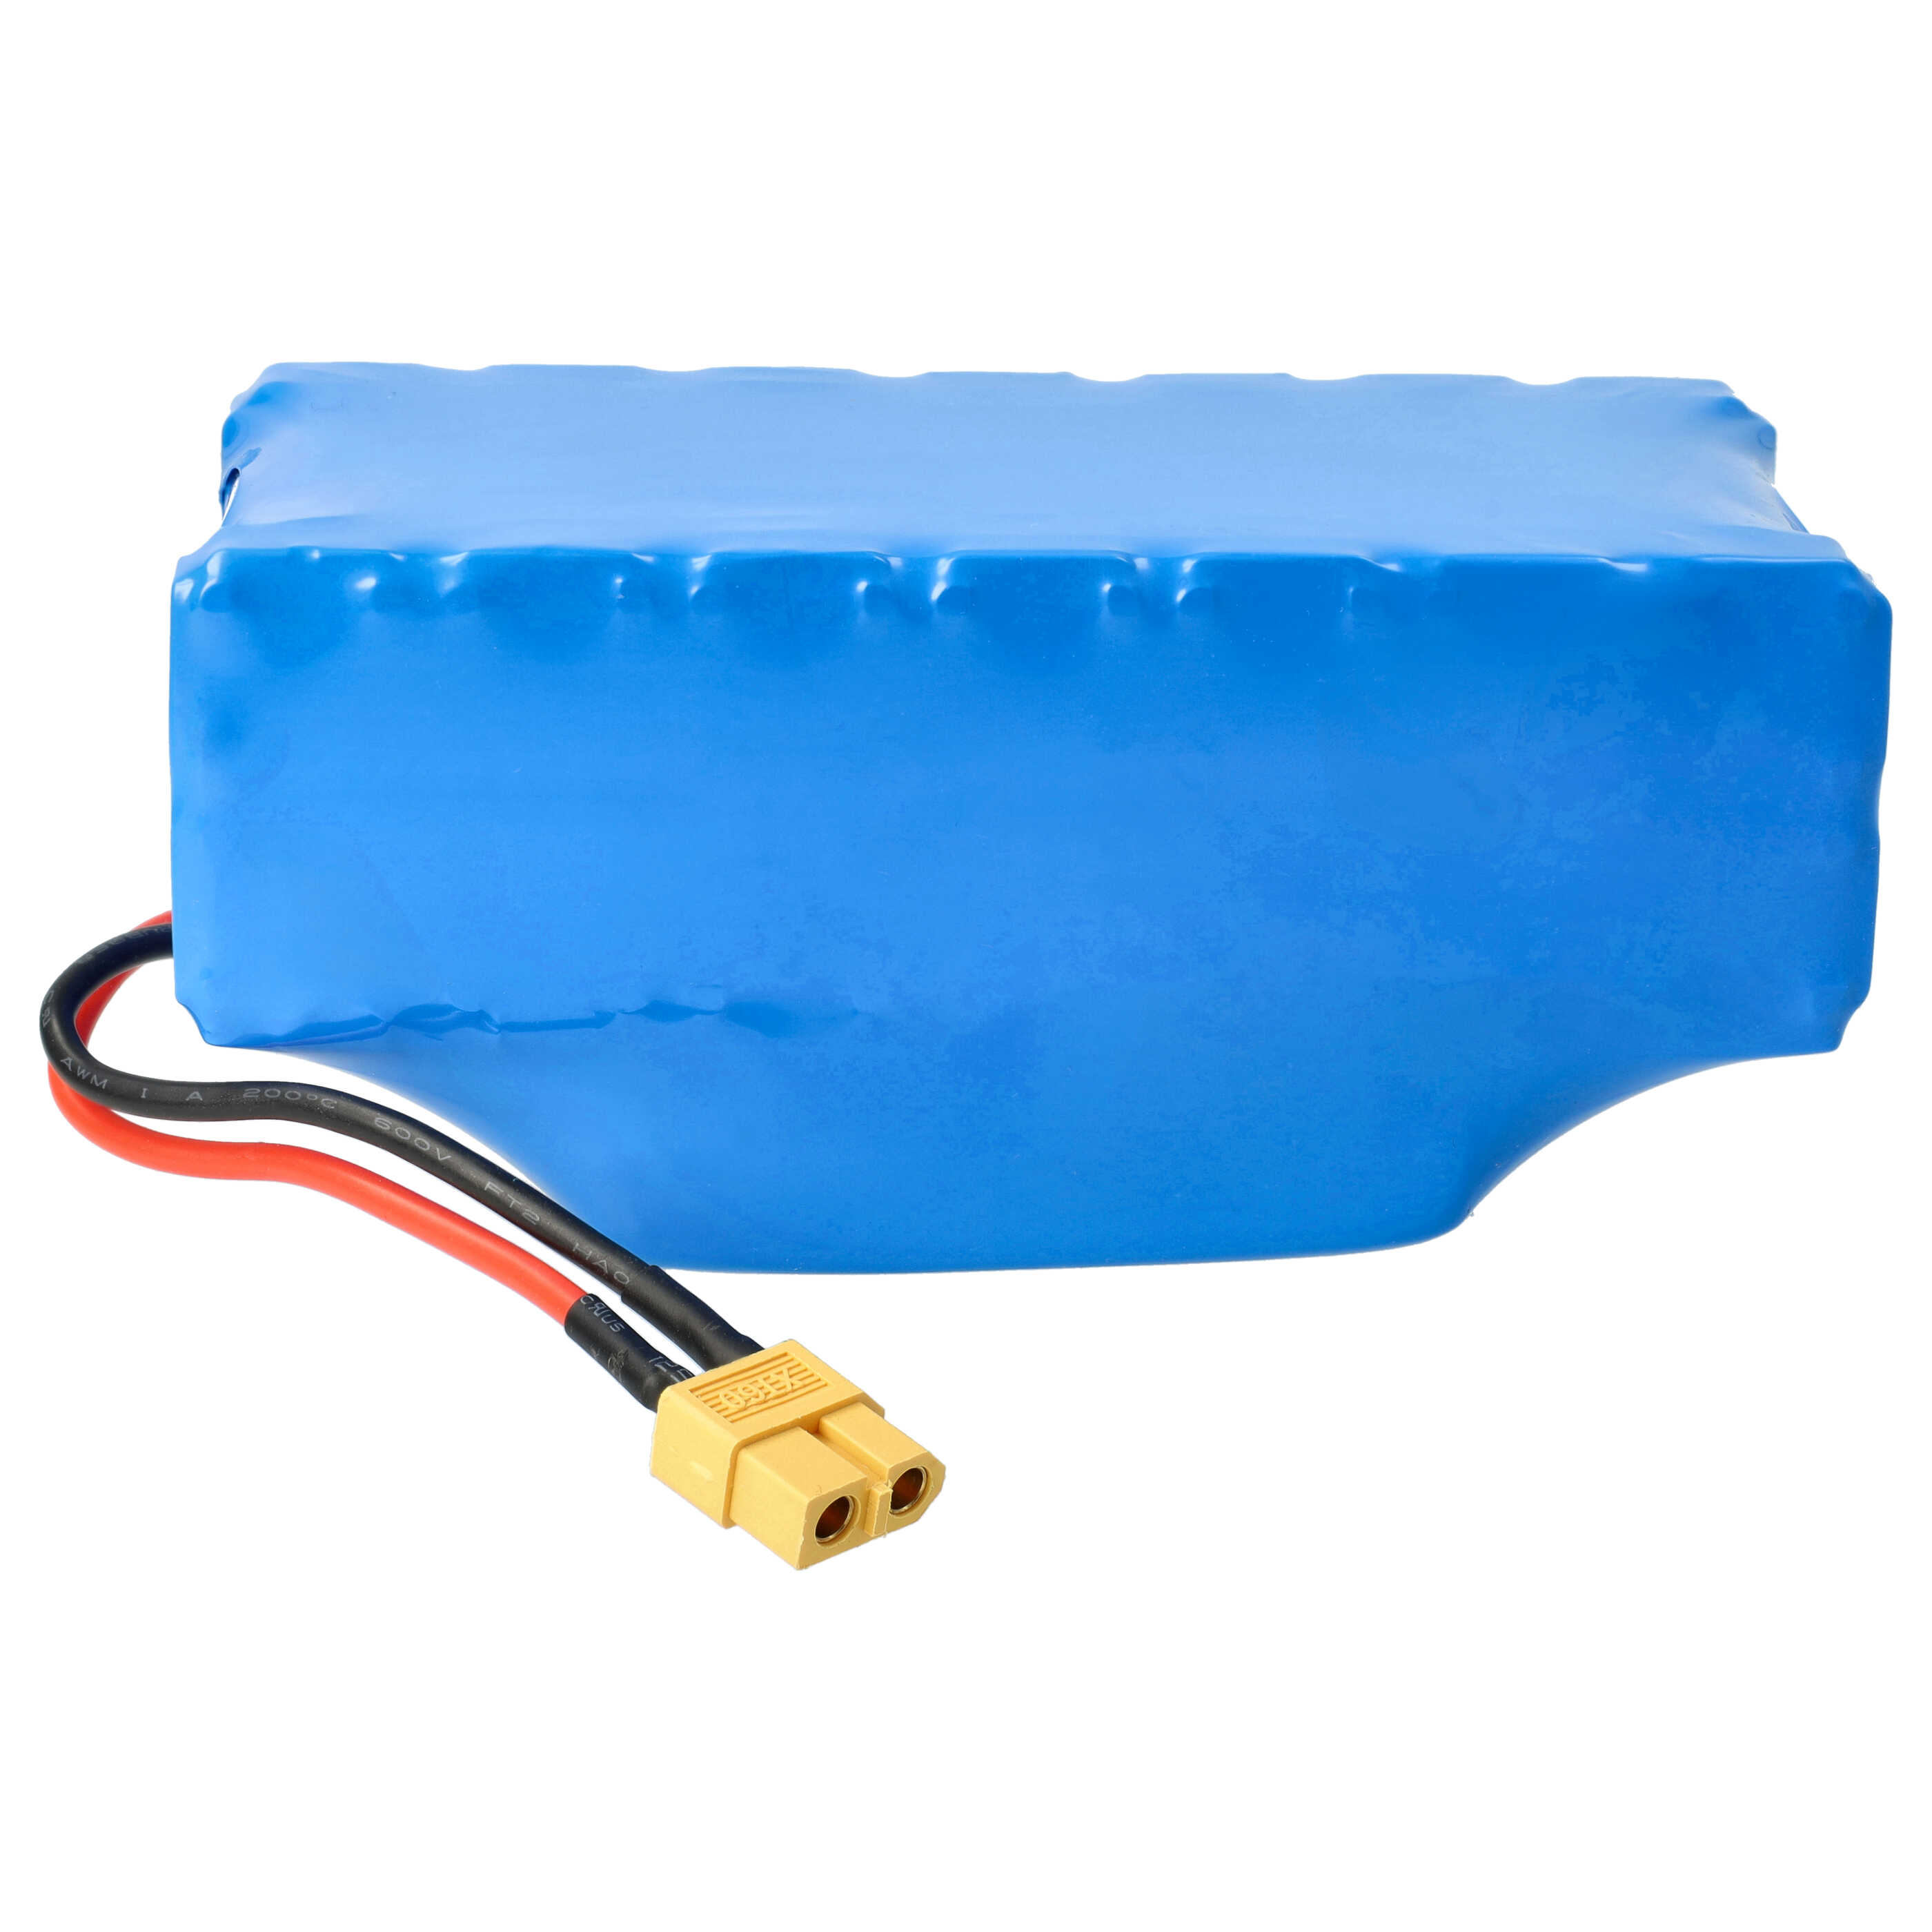 E-Board Battery Replacement for Elitop 0702AS-HCY - 3900mAh 25.2V Li-Ion